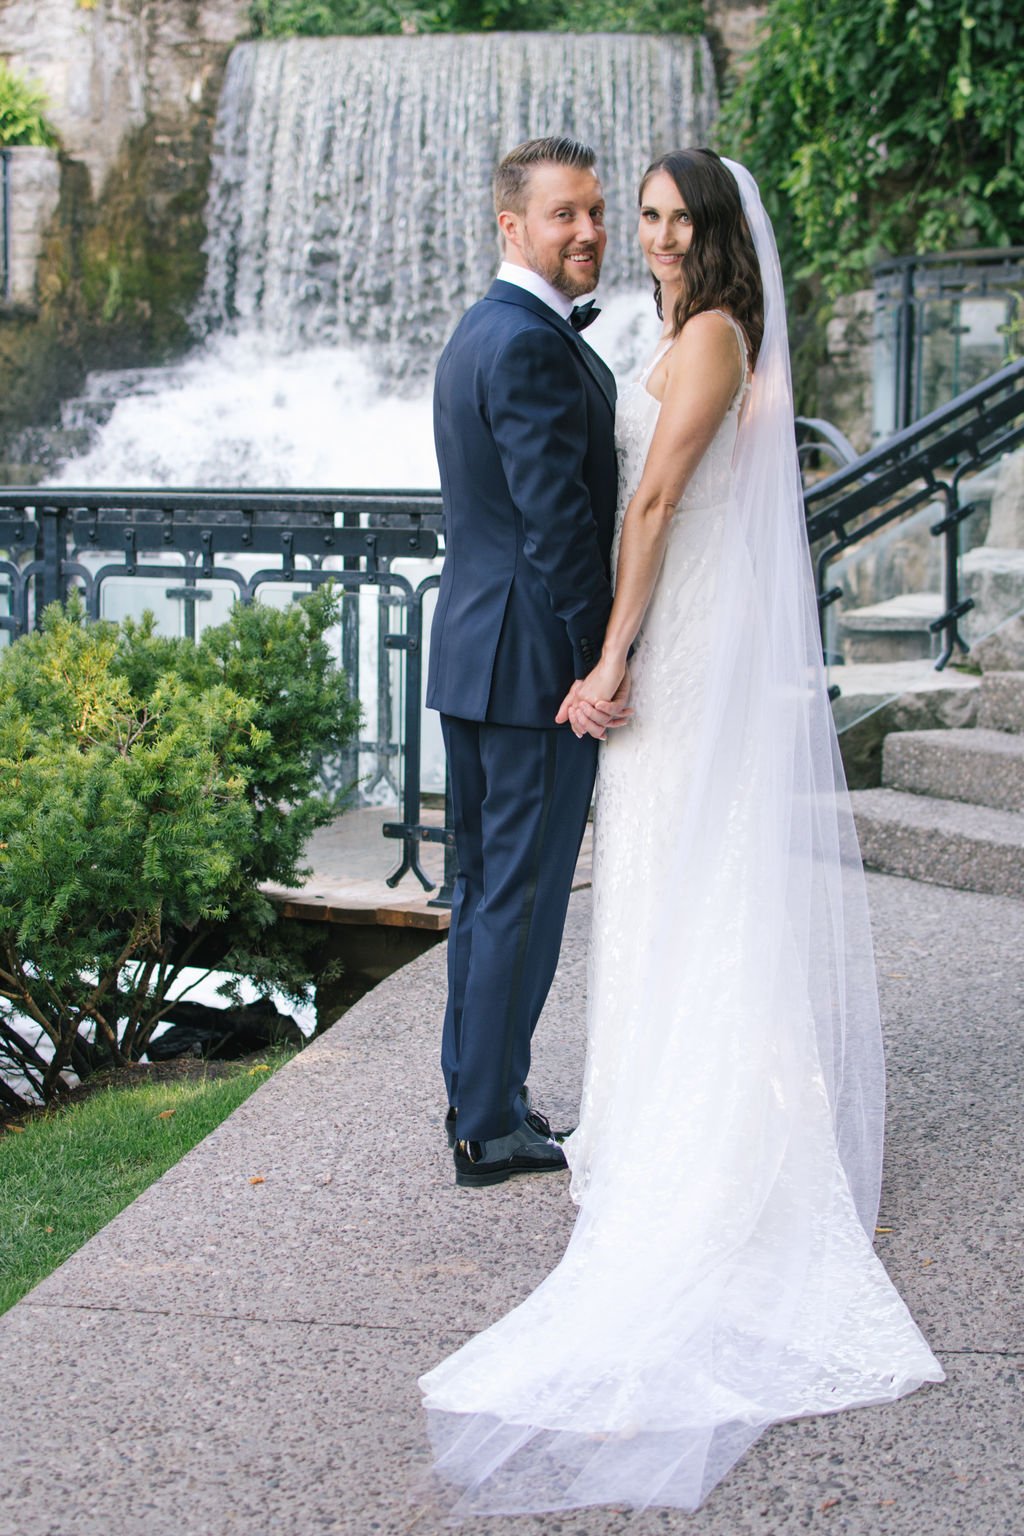 Modern Romance Meets Timeless Black Tie Style For Couple's Summer Wedding at Ancaster Mill